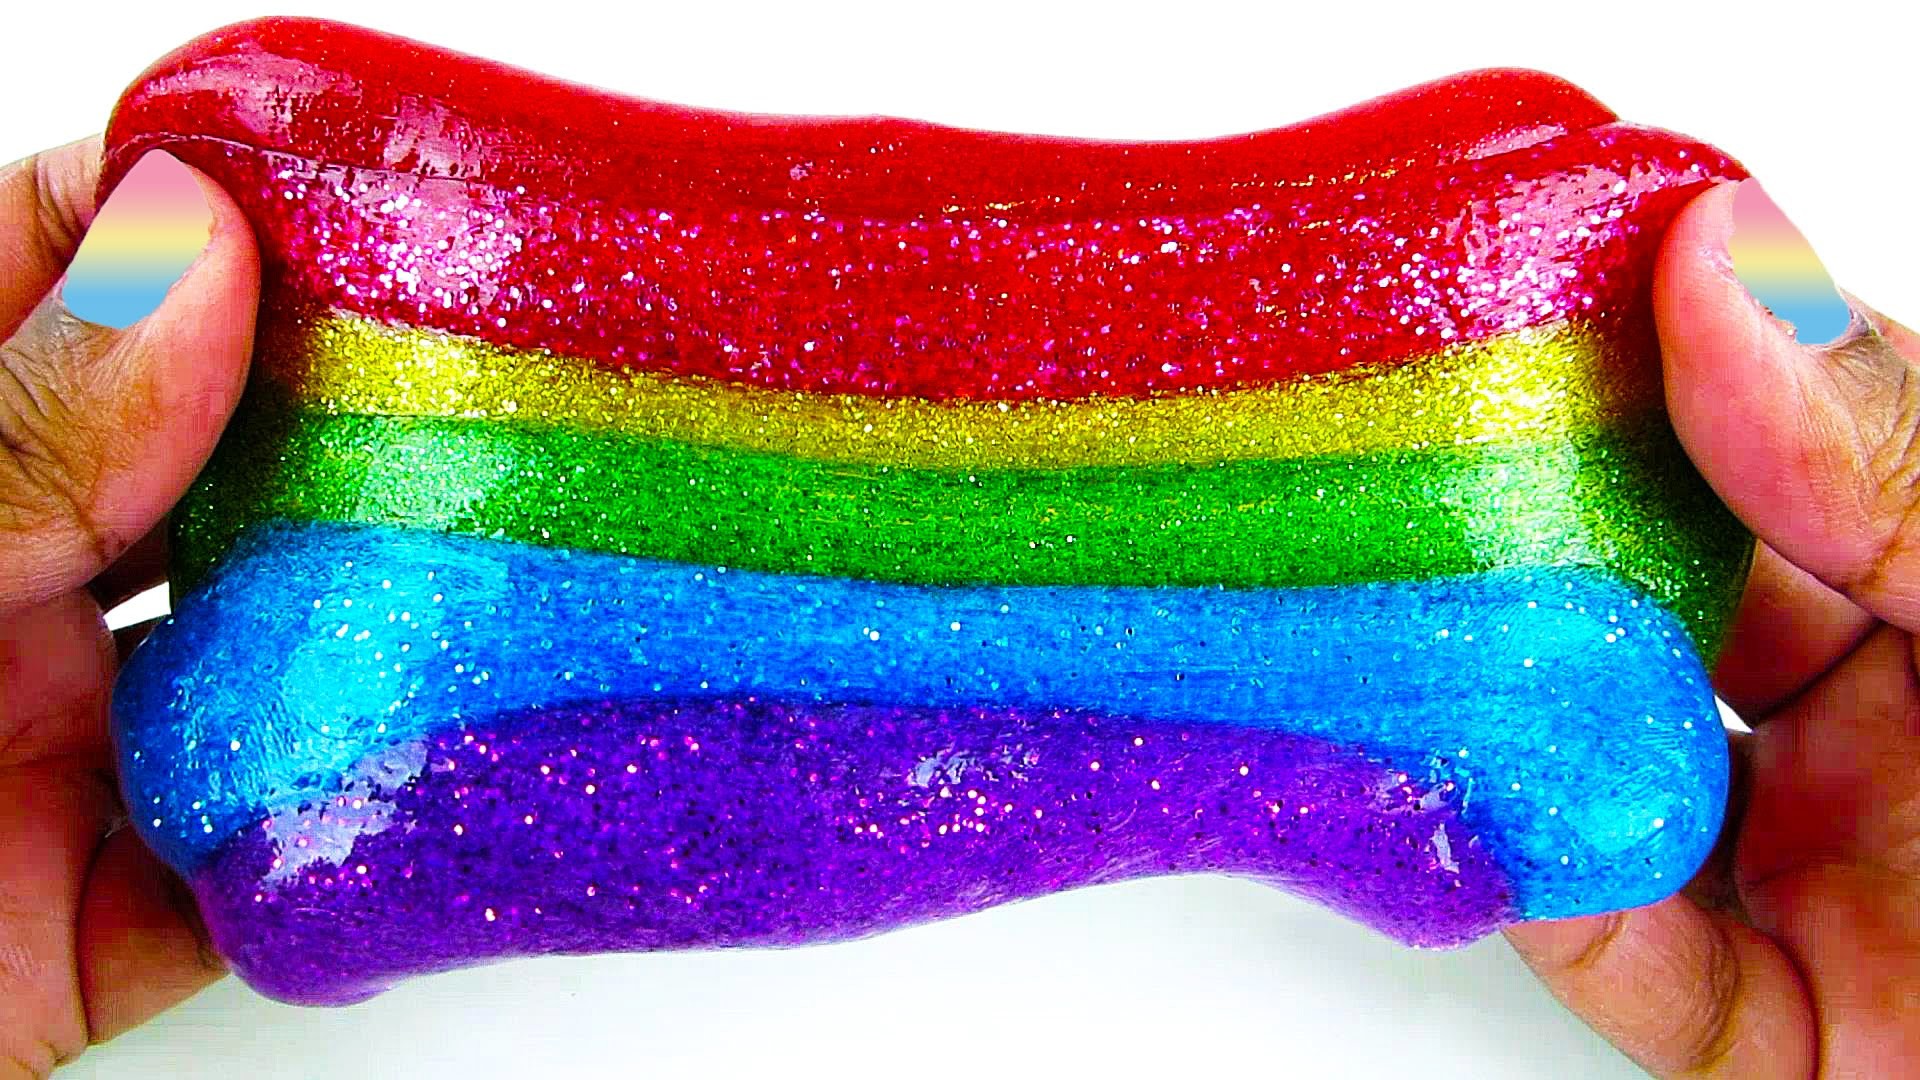 Rainbow Glitter Slime Diy Fun And Easy How To Make Slime Sparkly Shimmery Slime